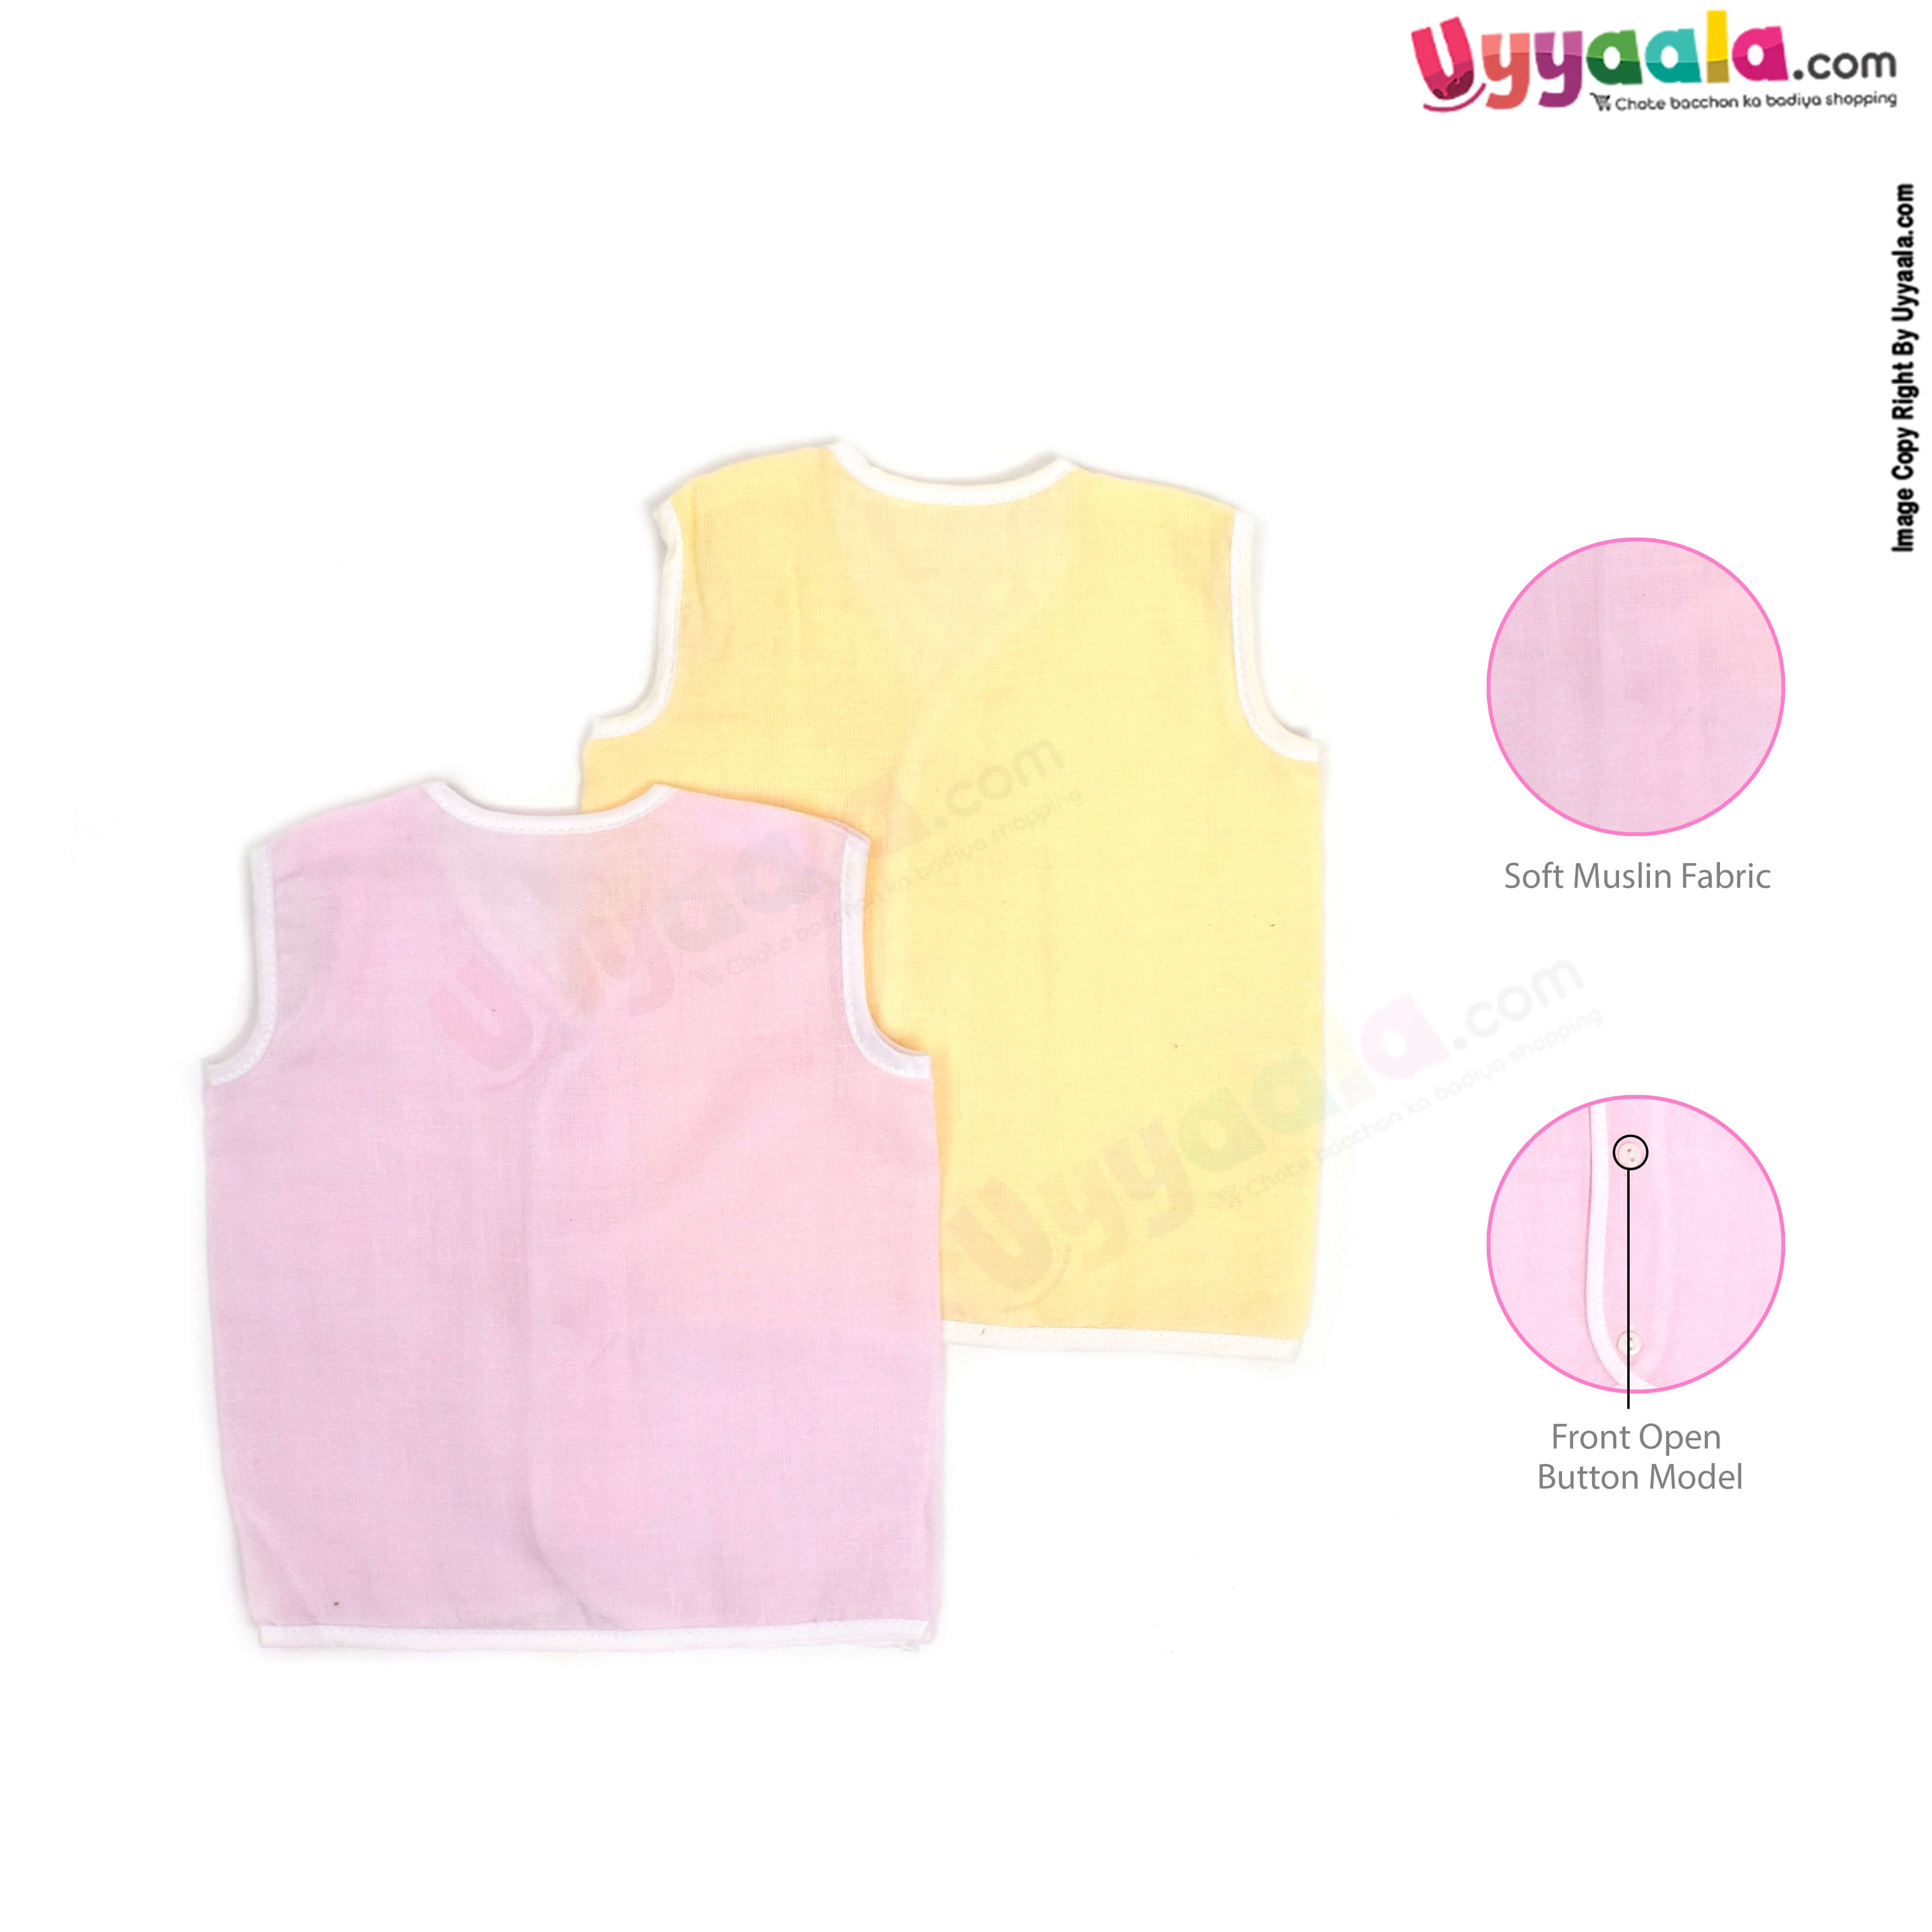 POLAR CUBS Sleeveless Baby Jabla Set, Front Opening Button Model, Premium Quality Muslin Cotton Baby Wear, 2 Pack - Yellow & Pink